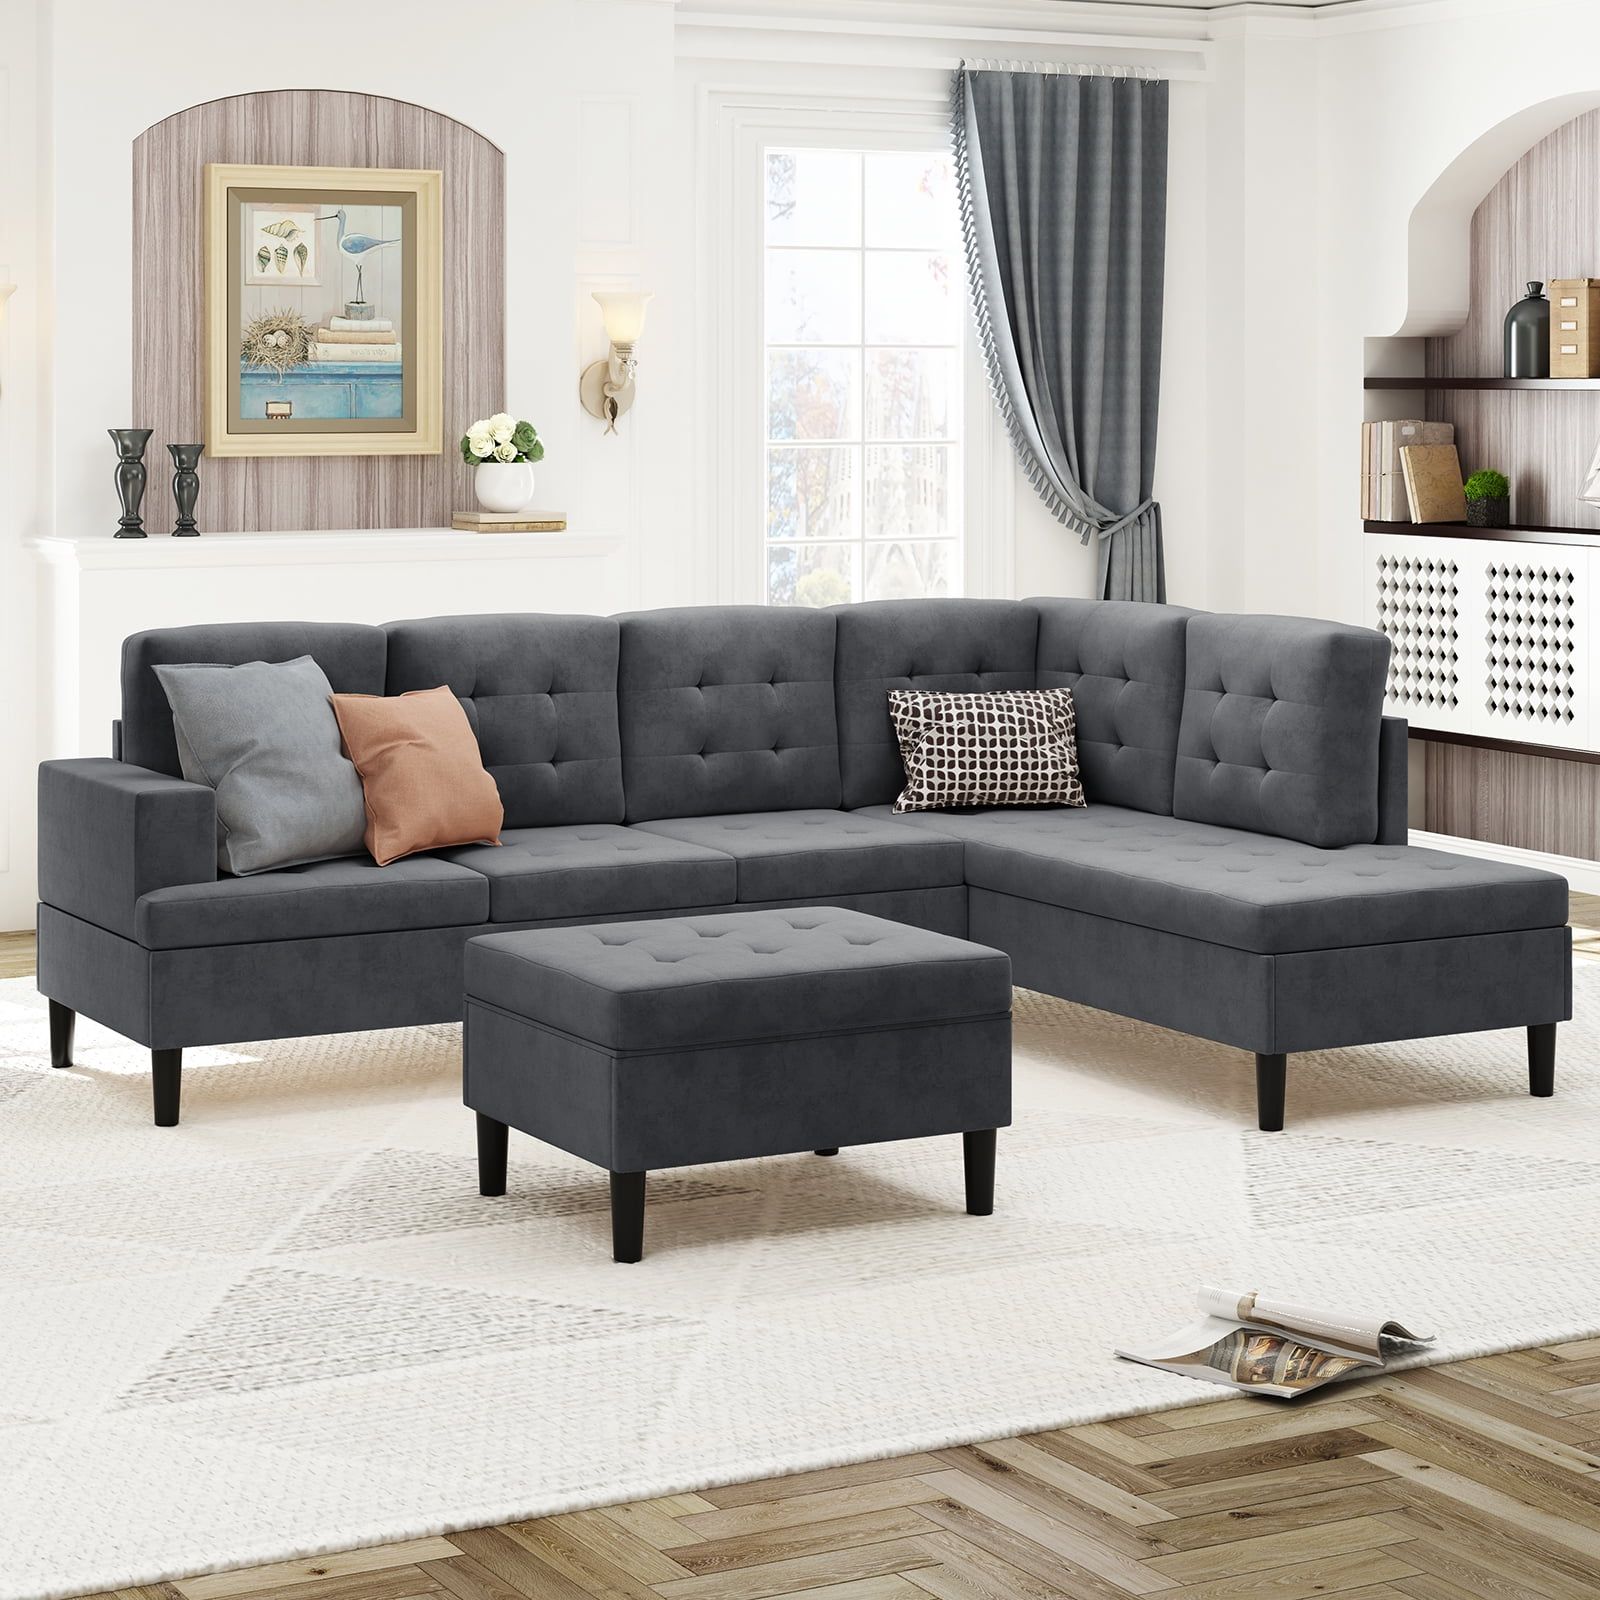 Mjkone Modern Upholstered Tufted L Shape Sofa,Microsuede Fabric Sectional  Sofa Set,Oversized Sectional Sleeper Sofa Couch With Movable Ottoman For  Living Room/Loft/Apartment (Coffee) – Walmart Within Modern L Shaped Sofa Sectionals (View 9 of 15)